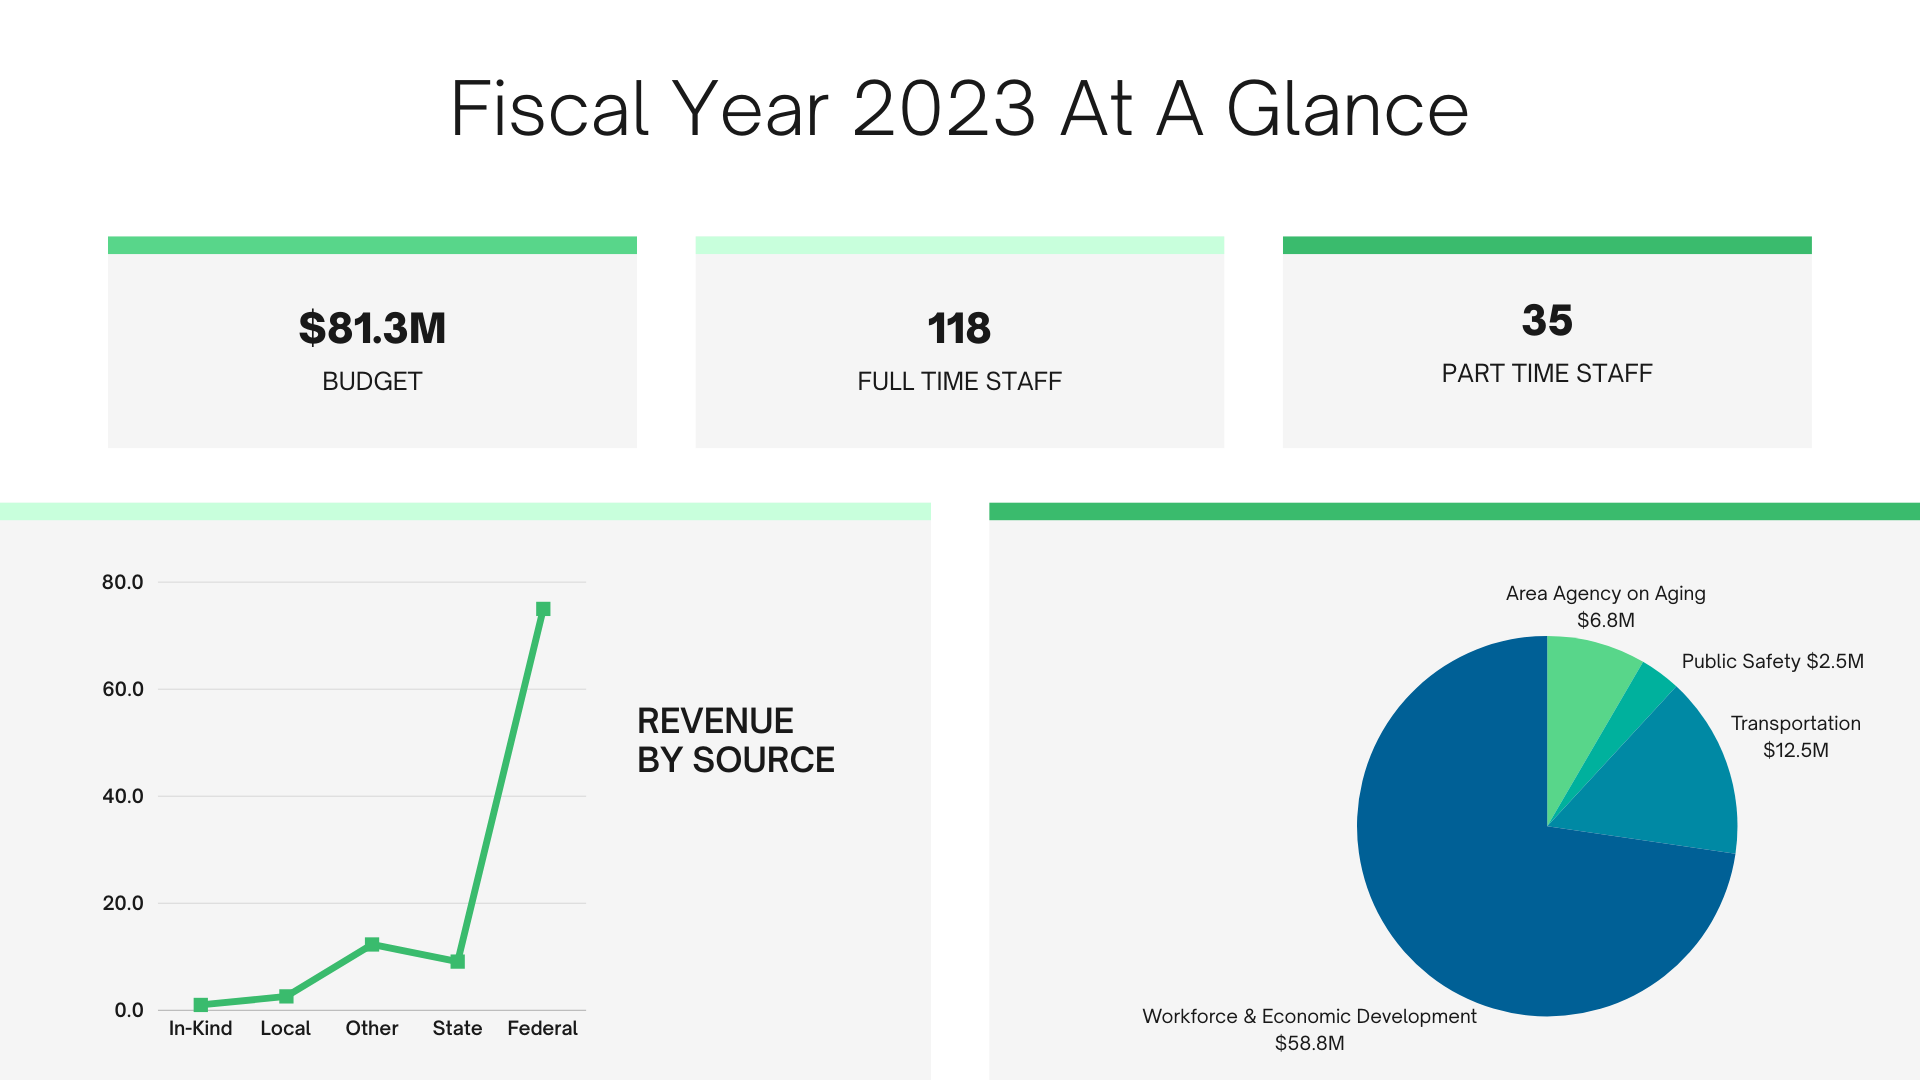 A dashboard showing a graph and a pie chart for fiscal year 2023 at a glance.